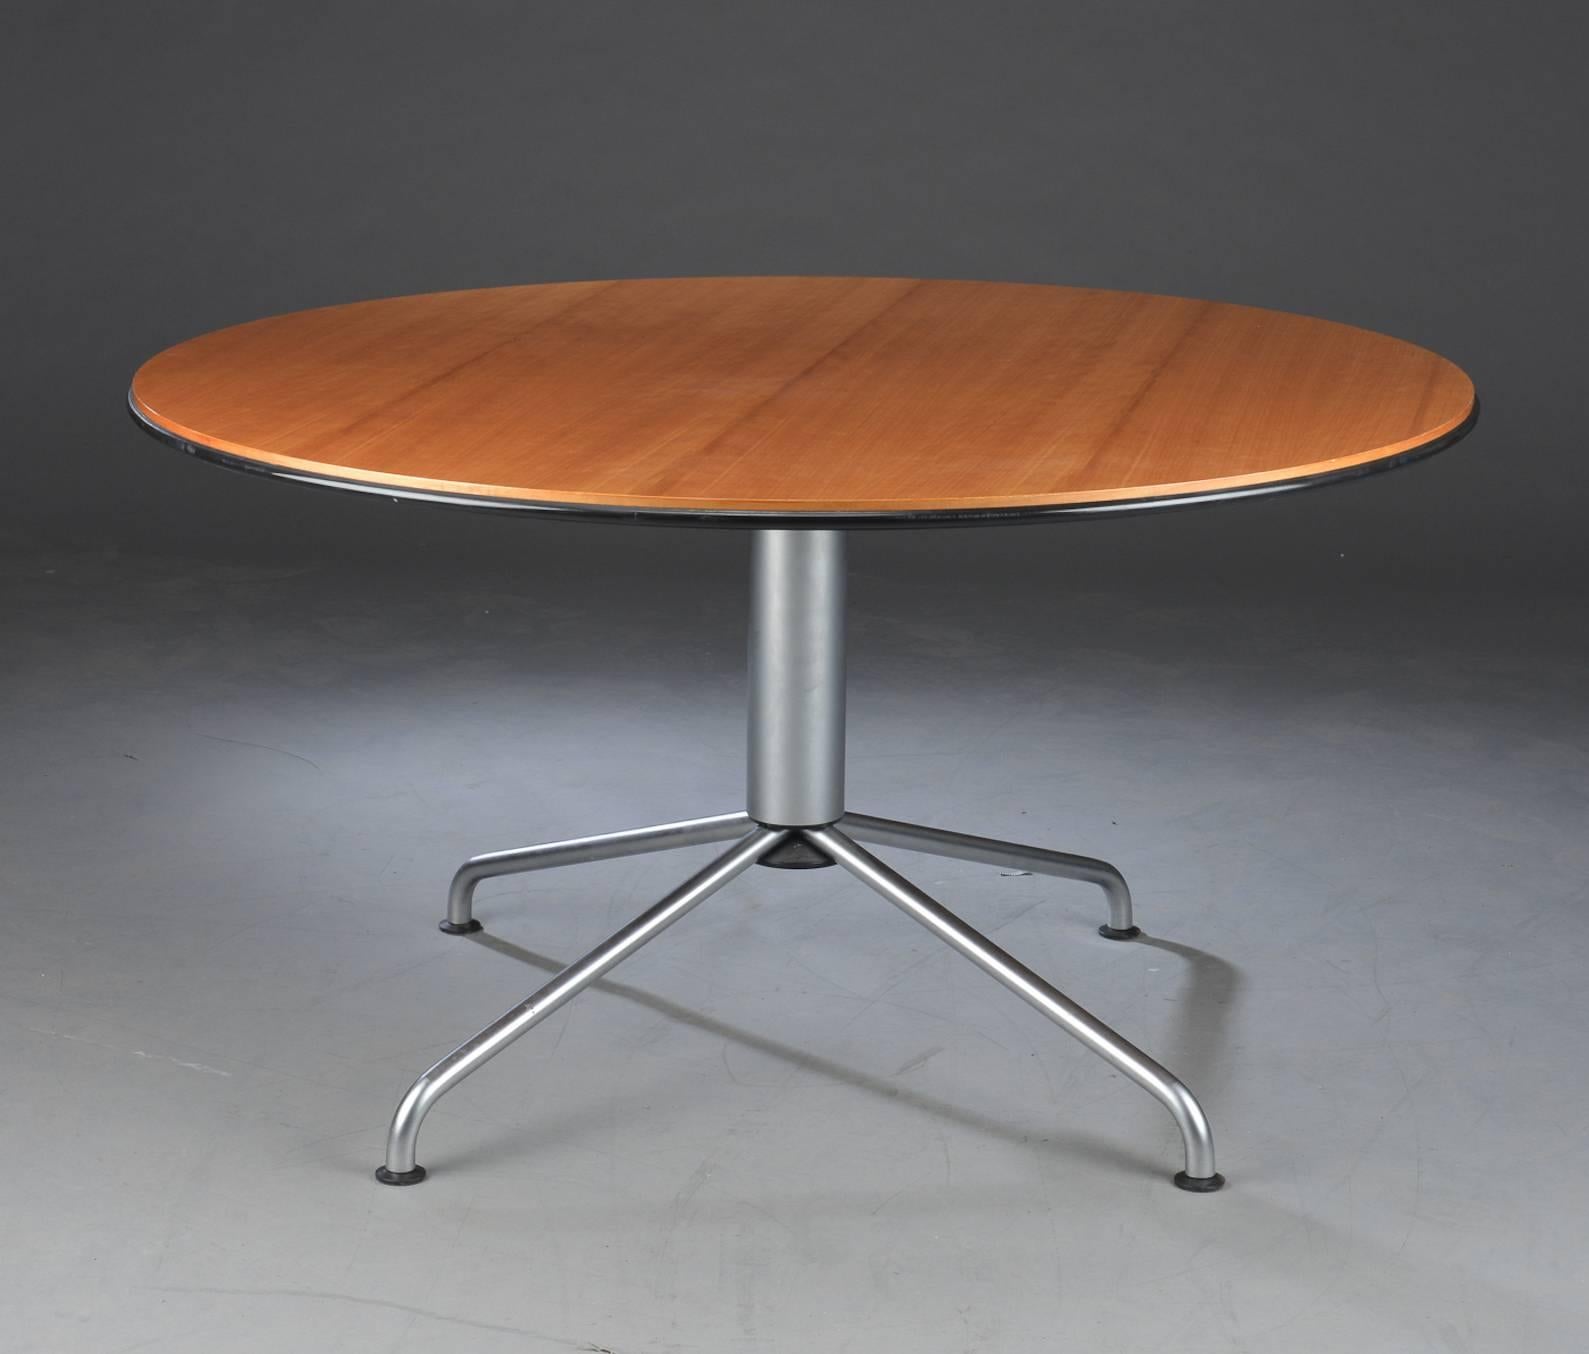 Circular dining table with plate of cherrywood with rubber edge, satin steel frame on Classic four-legged foot designed by Vico Magistretti (1920-2006).
Produced in Denmark by Fritz Hansen.
 